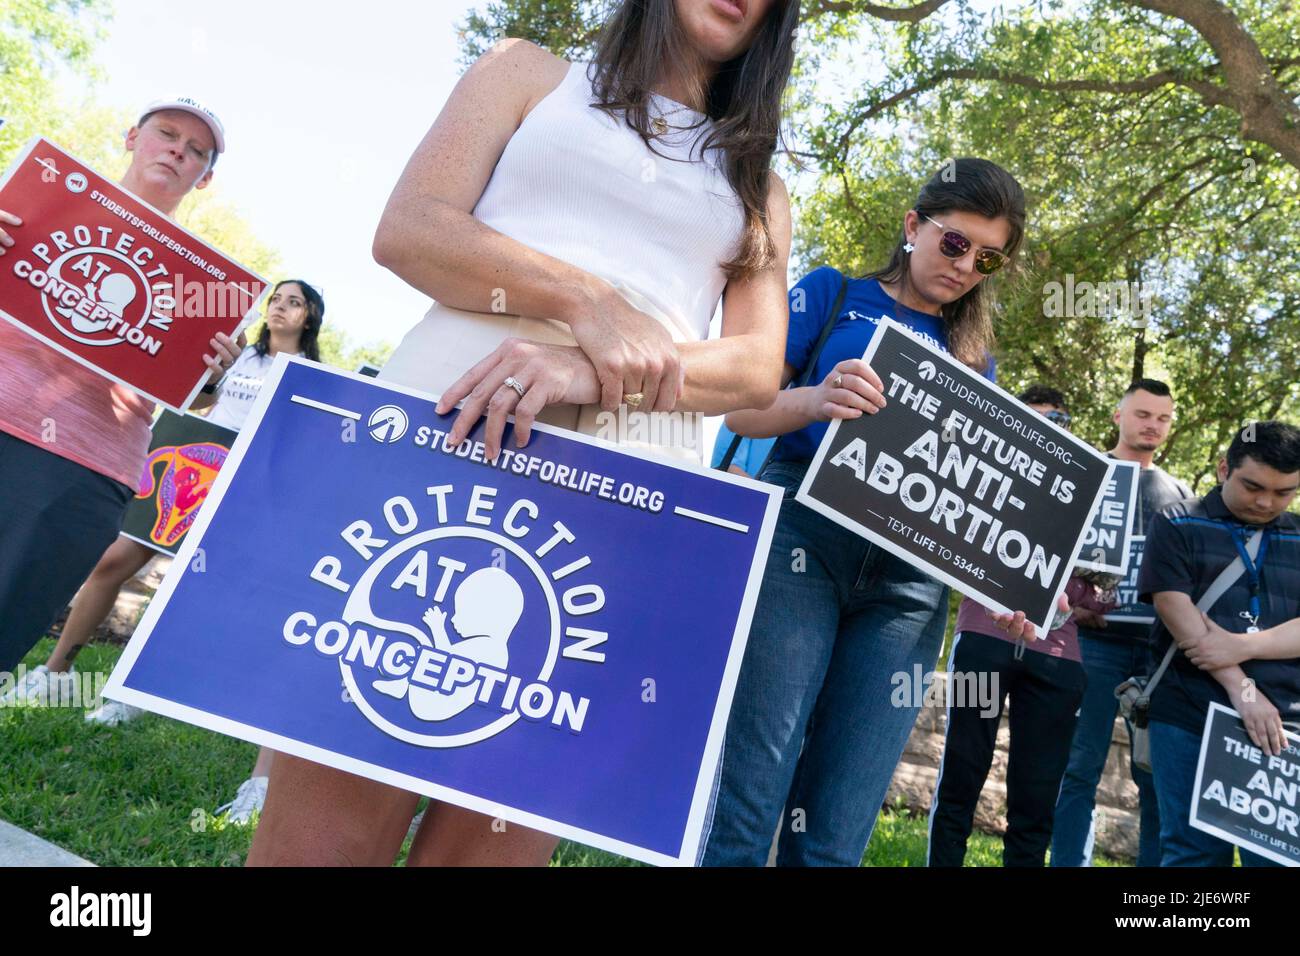 Austin Texas USA, June 25 2022: Chelsey Youman, c, of Human Coalition Action and Samantha Farnsworth, r, of Texas Right to Life pray as a dozen members of pro-life groups gather at the Texas Capitol to celebrate the U.S. Supreme Court decision overturning Roe v. Wade and federal protection for abortions. Credit: Bob Daemmrich/Alamy Live News Stock Photo